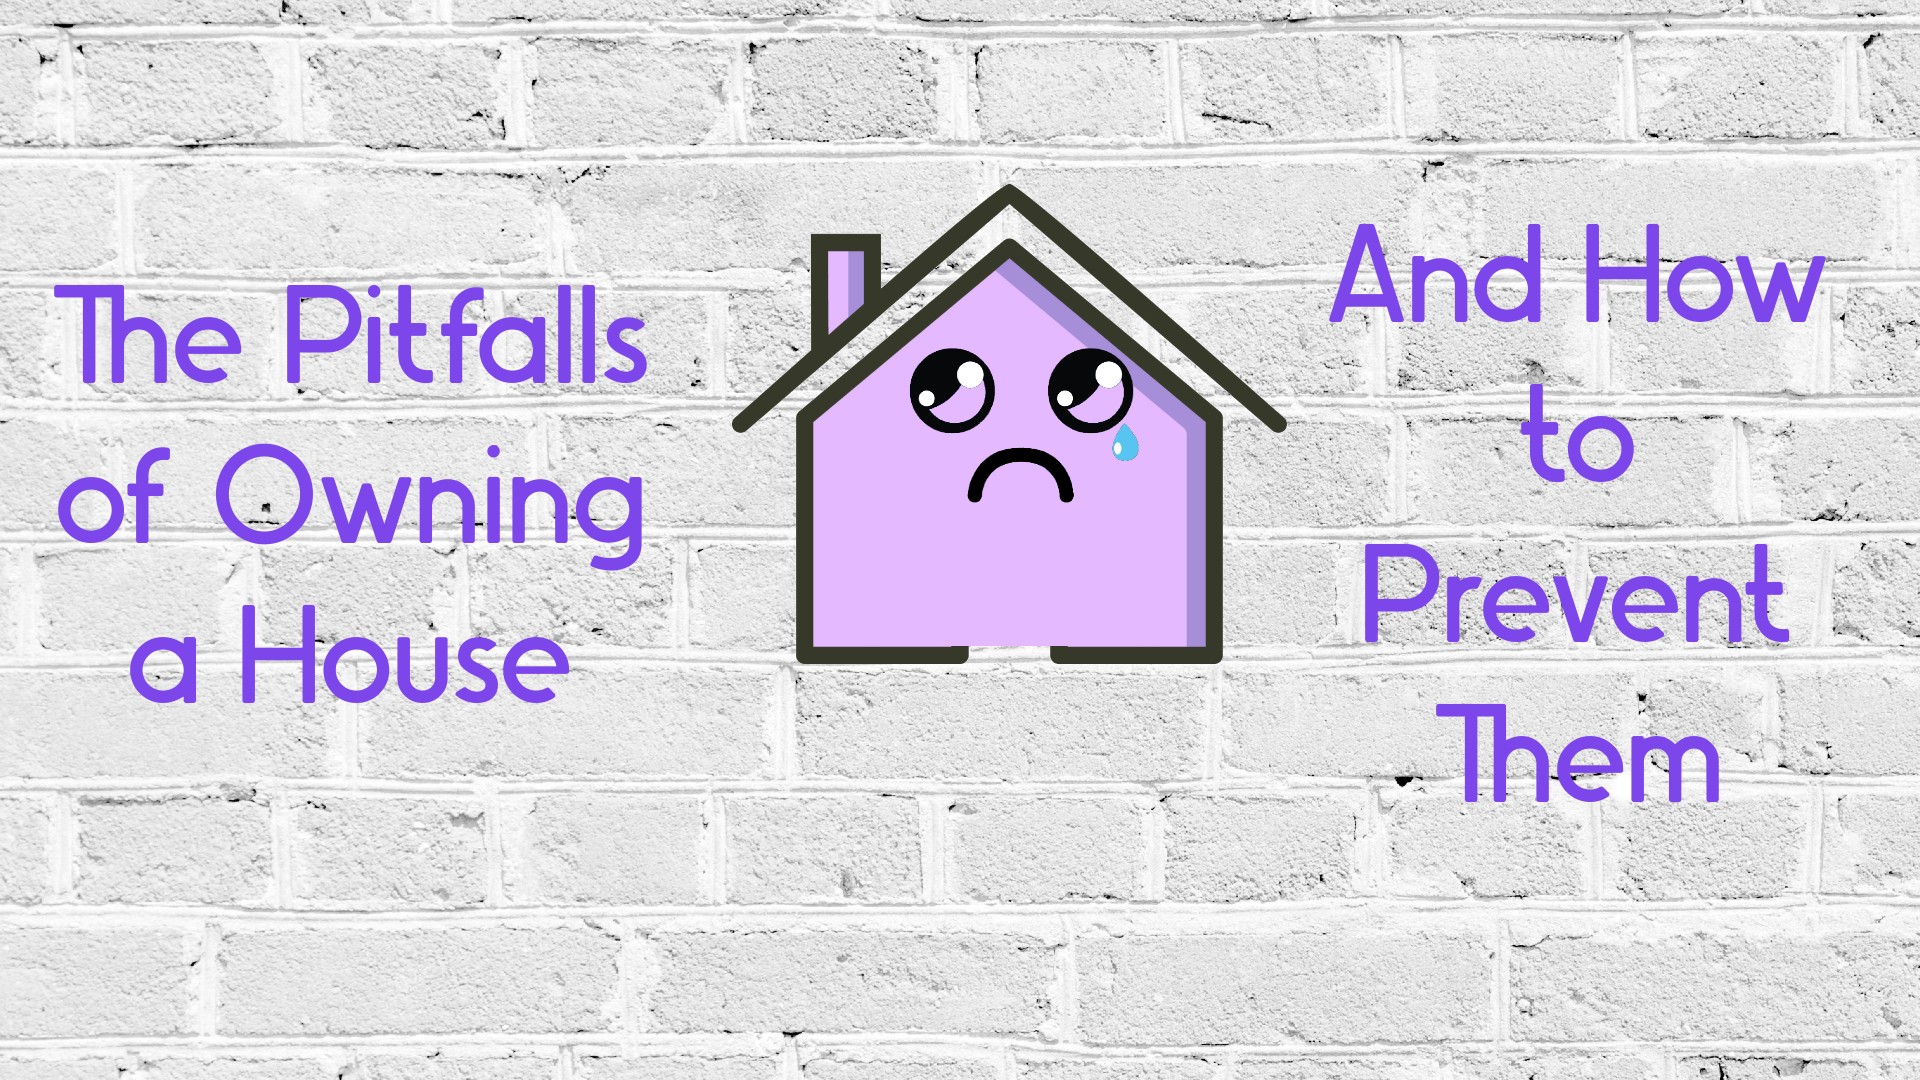 The Pitfalls of Owning a House, and How to Prevent Them